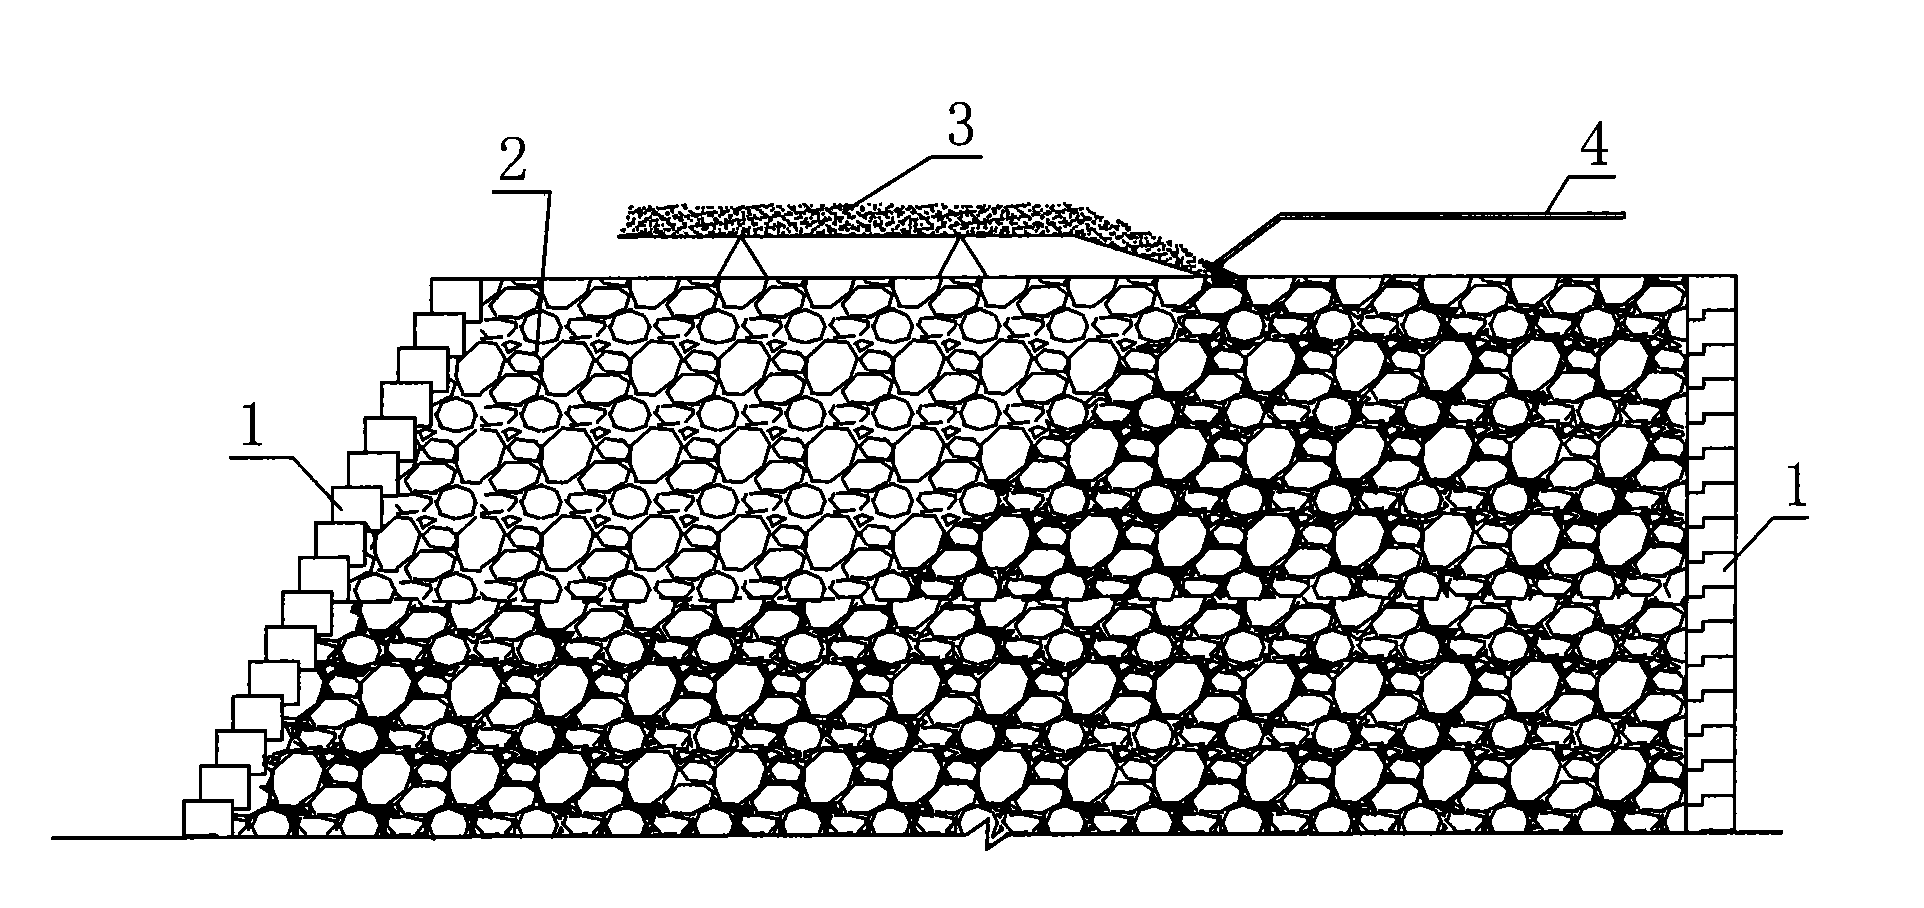 Construction method for filling mortar combined stone dam